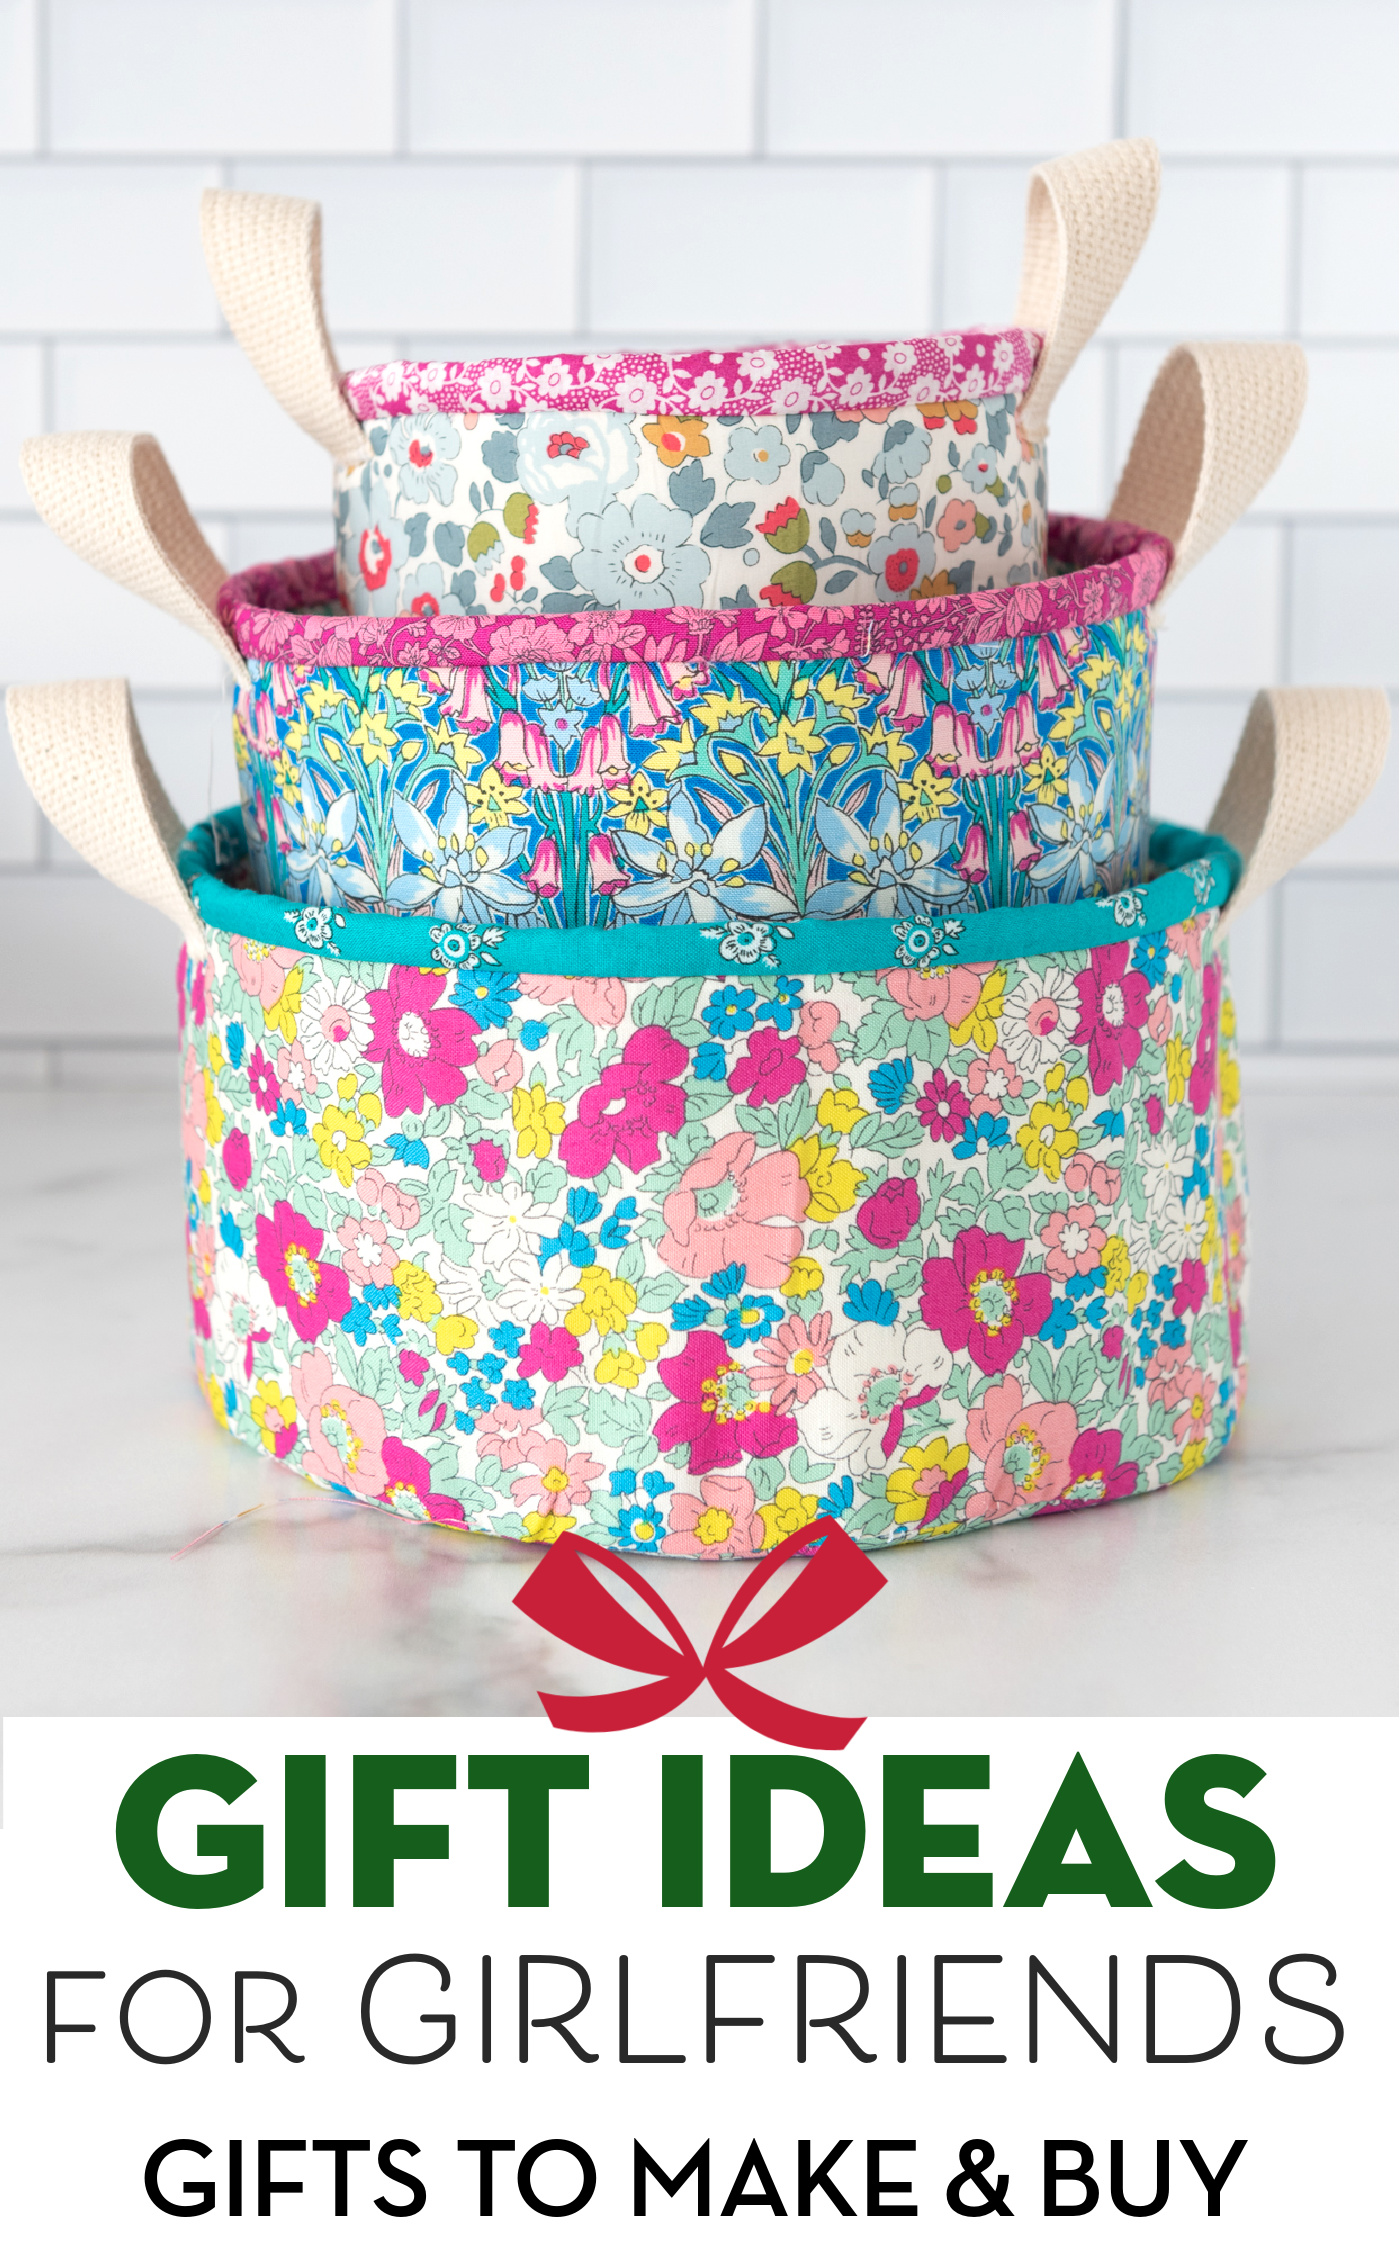 Wrapping Paper Neighbor Gift Idea with Printable - Girl Loves Glam